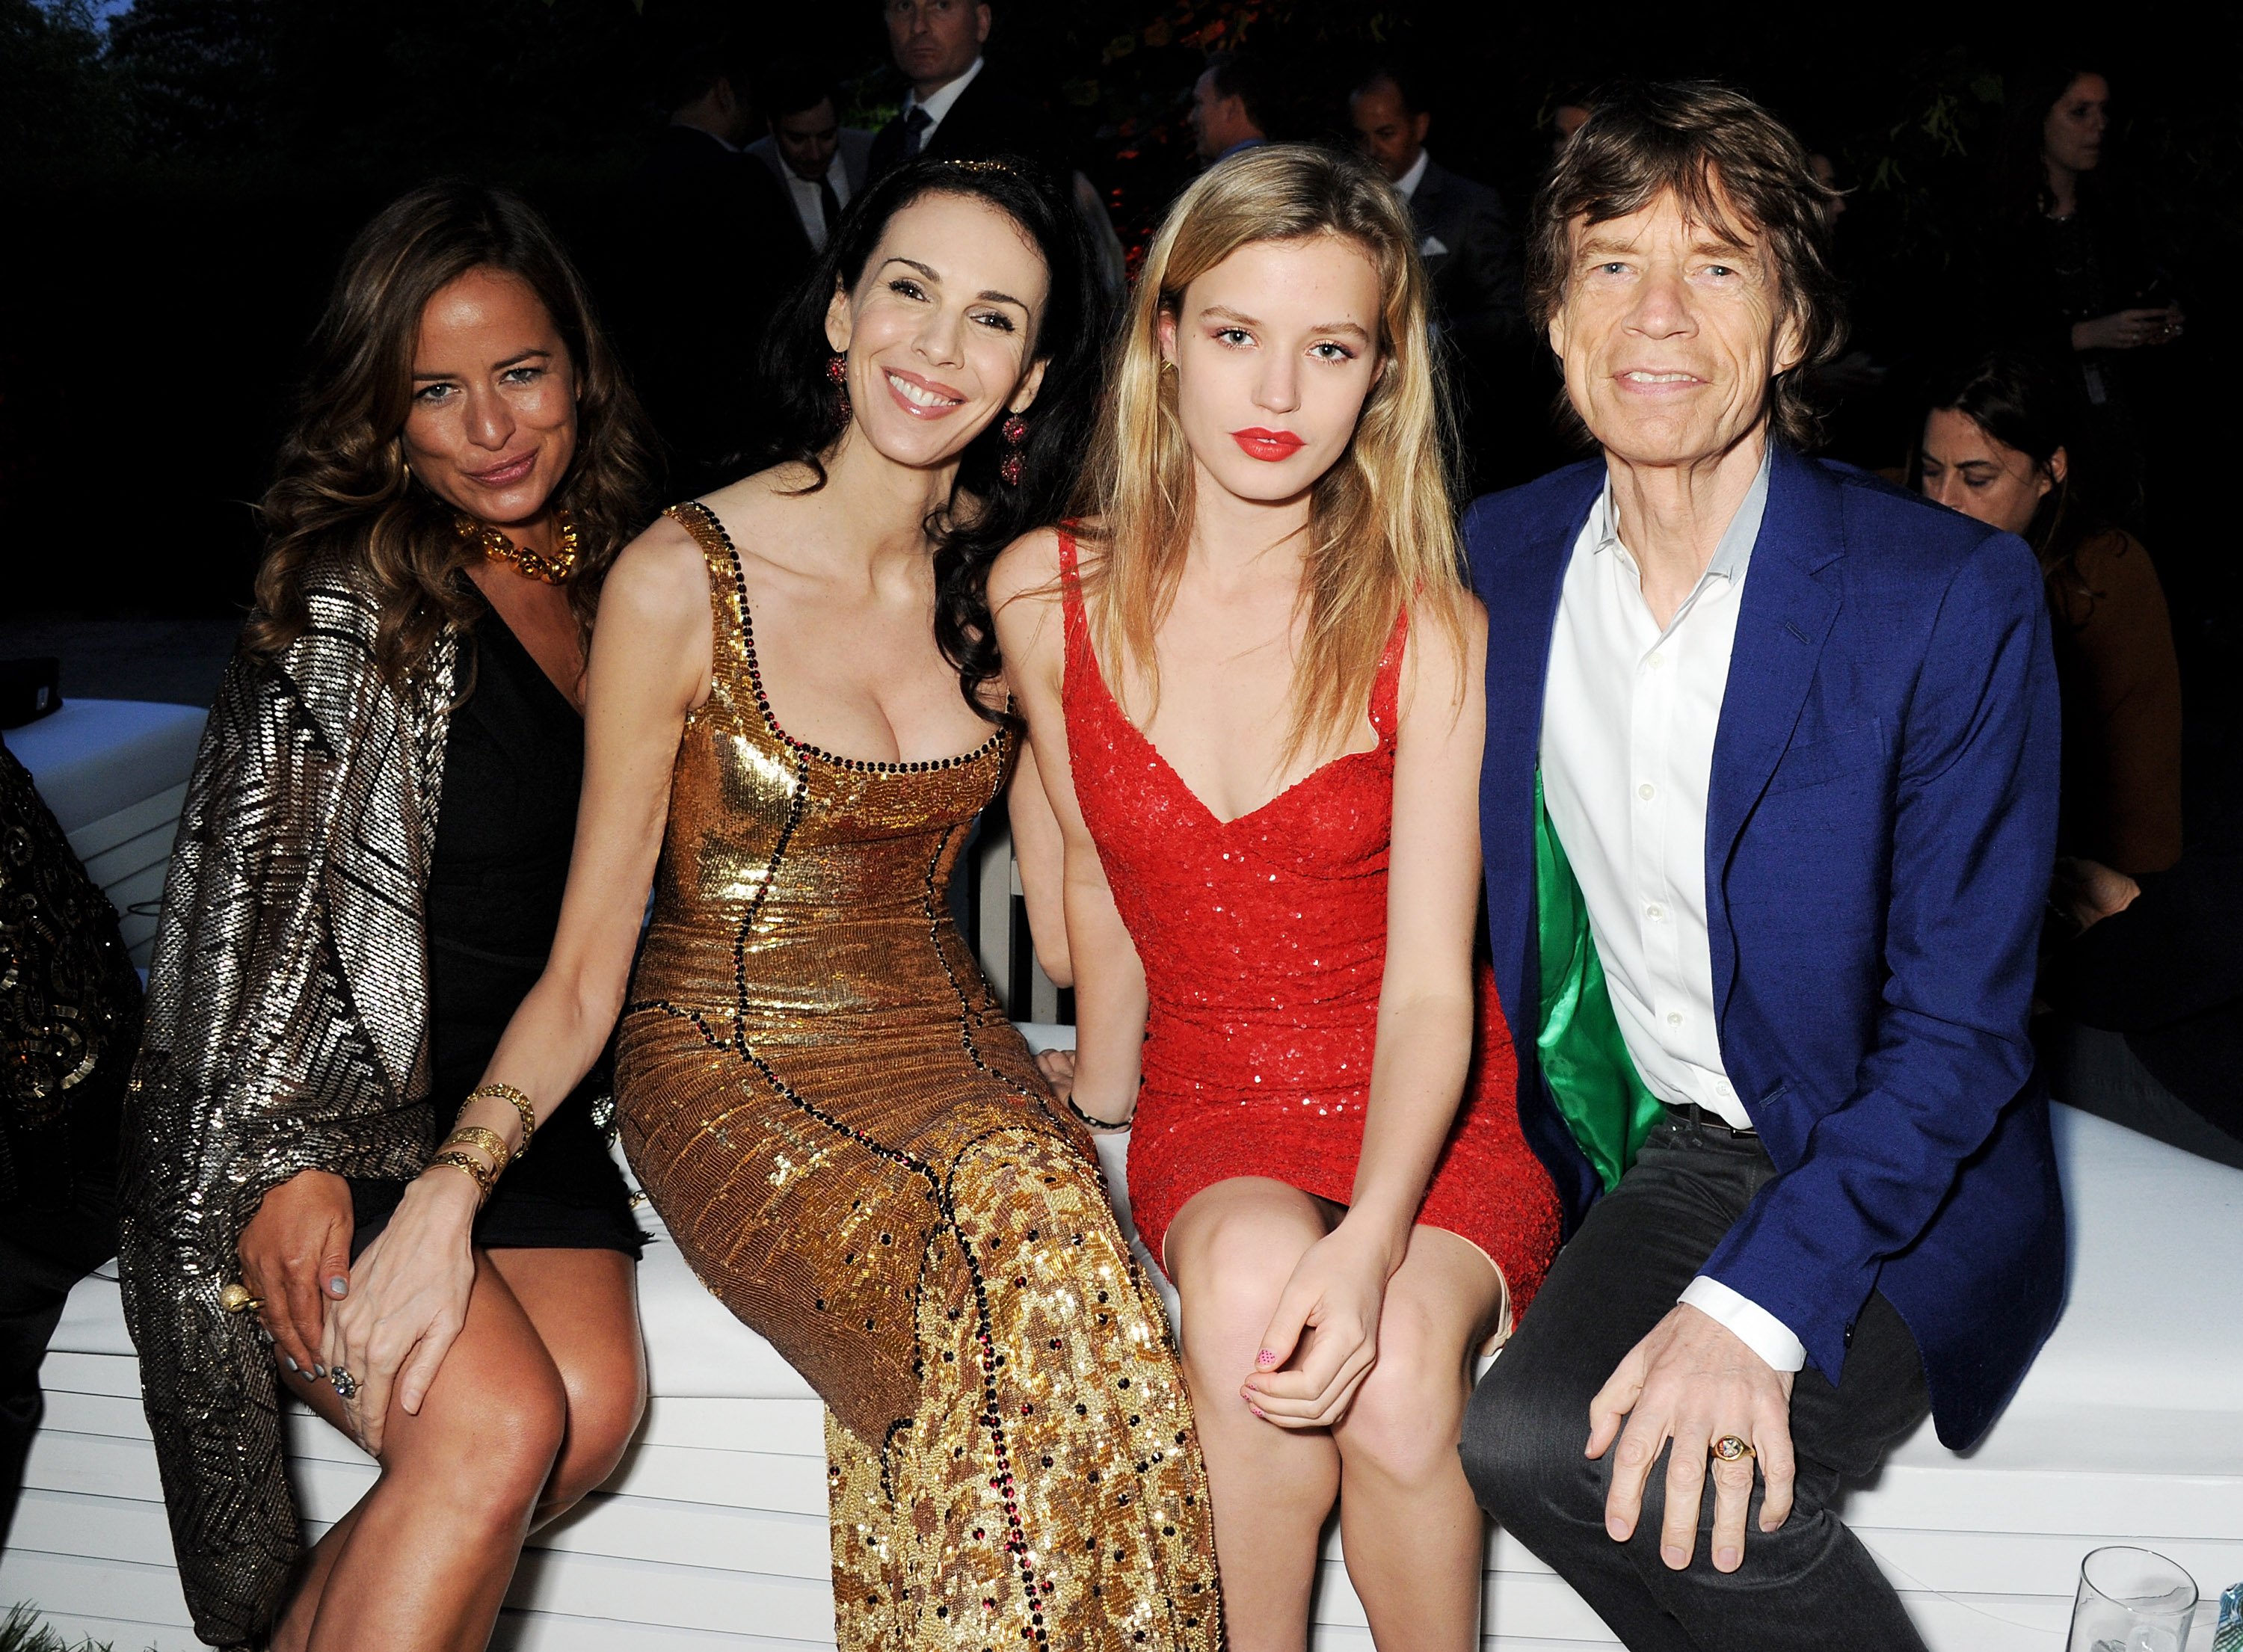 Jade Jagger, L'Wren Scott, Georgia Jagger and Mick Jagger at the annual Serpentine Gallery Summer Party on June 26, 2013 in London, England. | Photo by Dave M. Benett/Getty Images